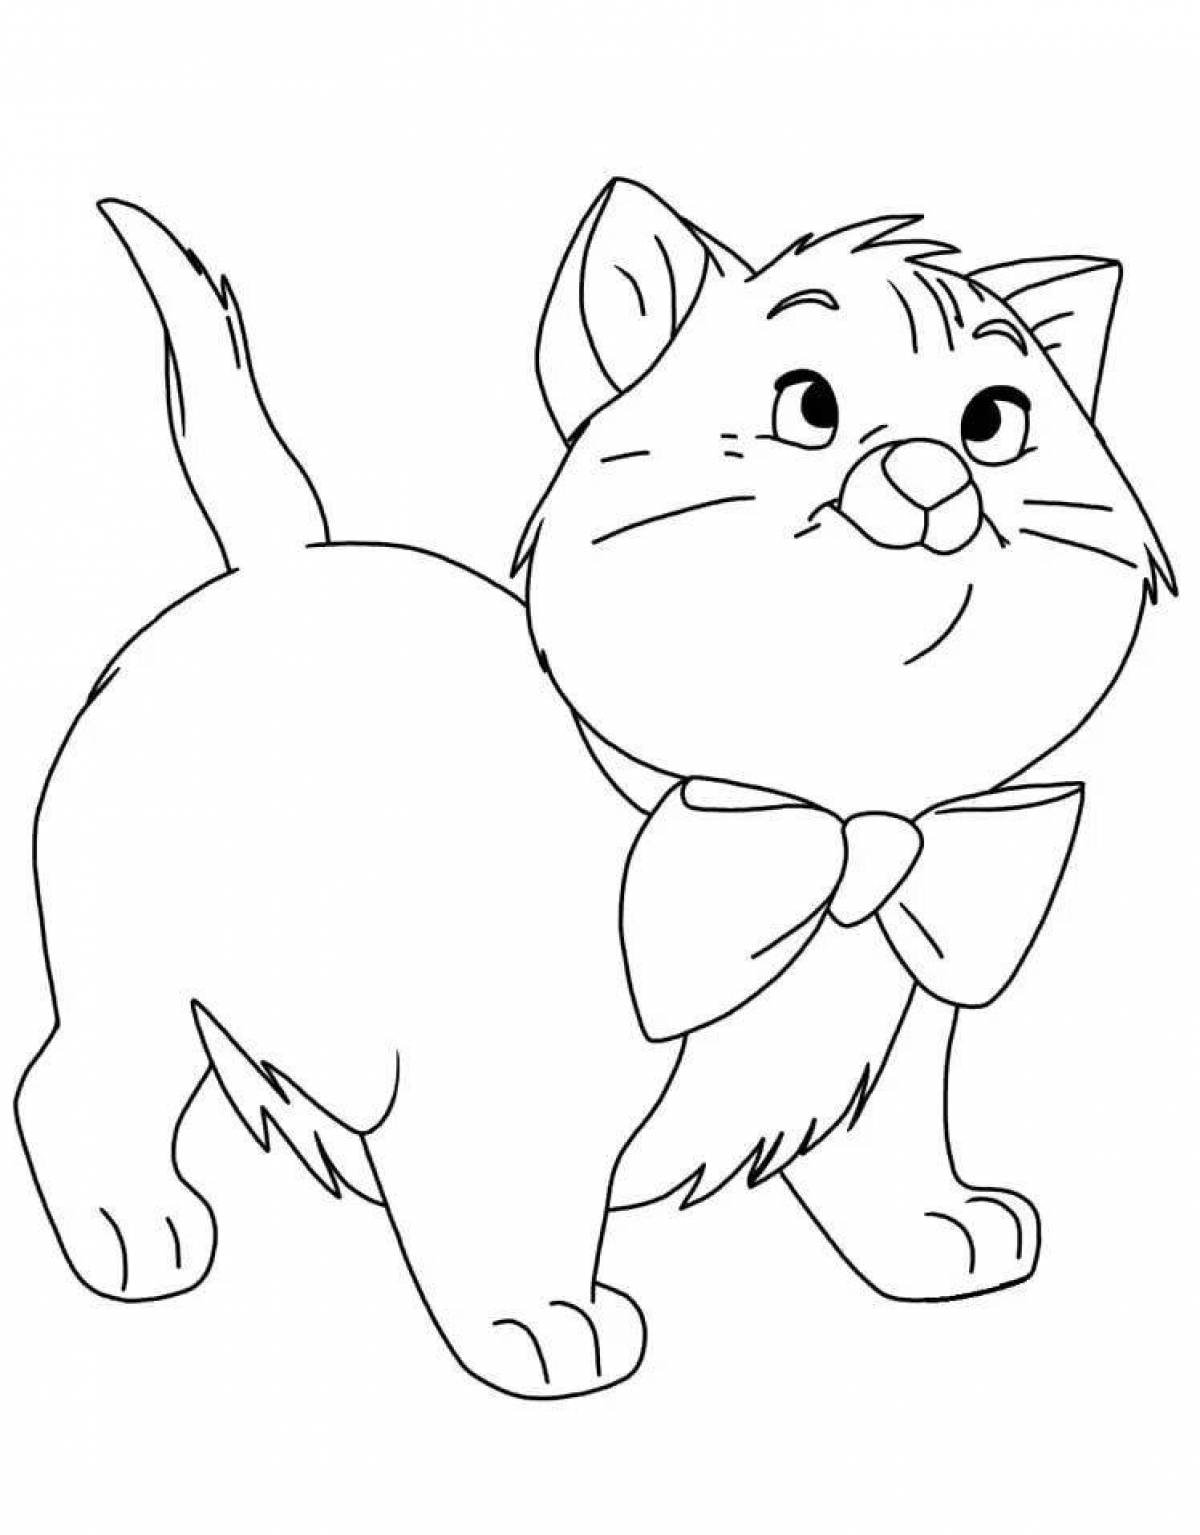 A witty drawing of a cat